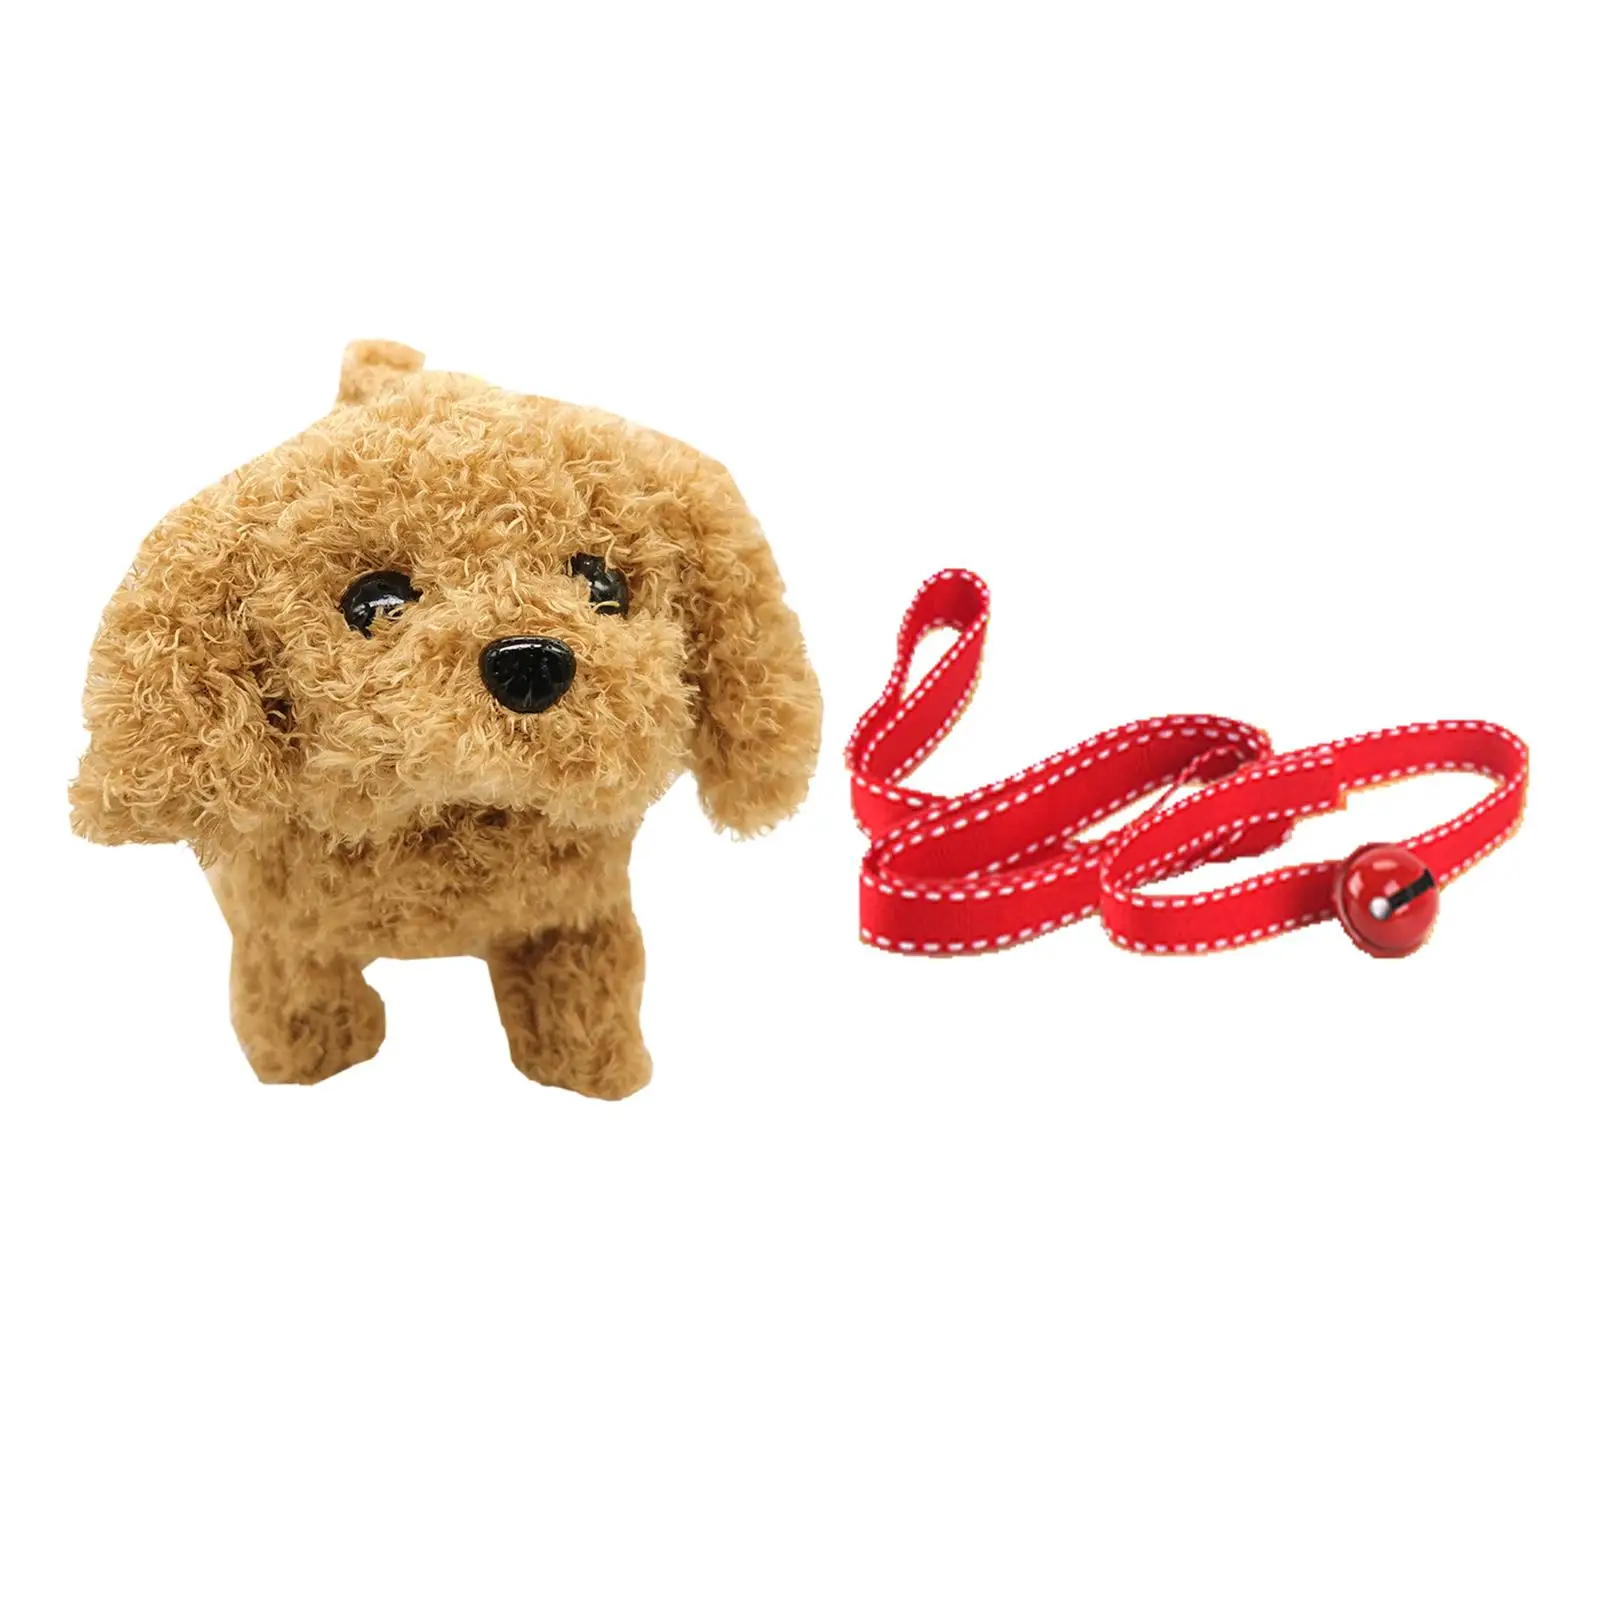 Electronic Plush Dog  Tail Wagging  Animal for Children, Toddlers, Birthday Gift, Play House Stuff, for Kids